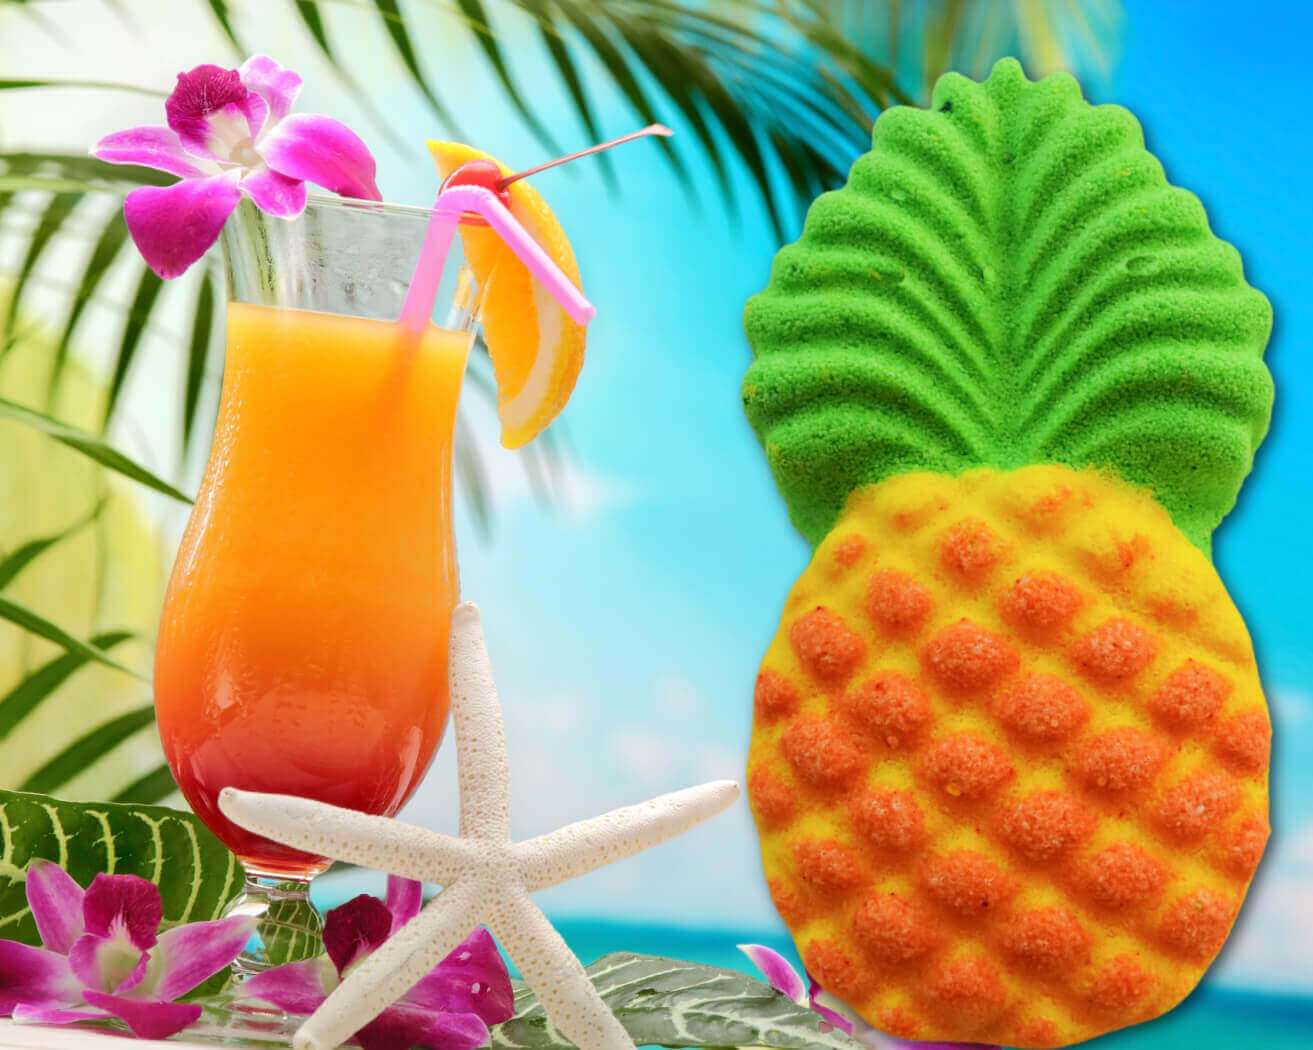 Love pineapples? Our Pineapple Passion Bath Bomb is your ticket to a serene, tropical bath escape!